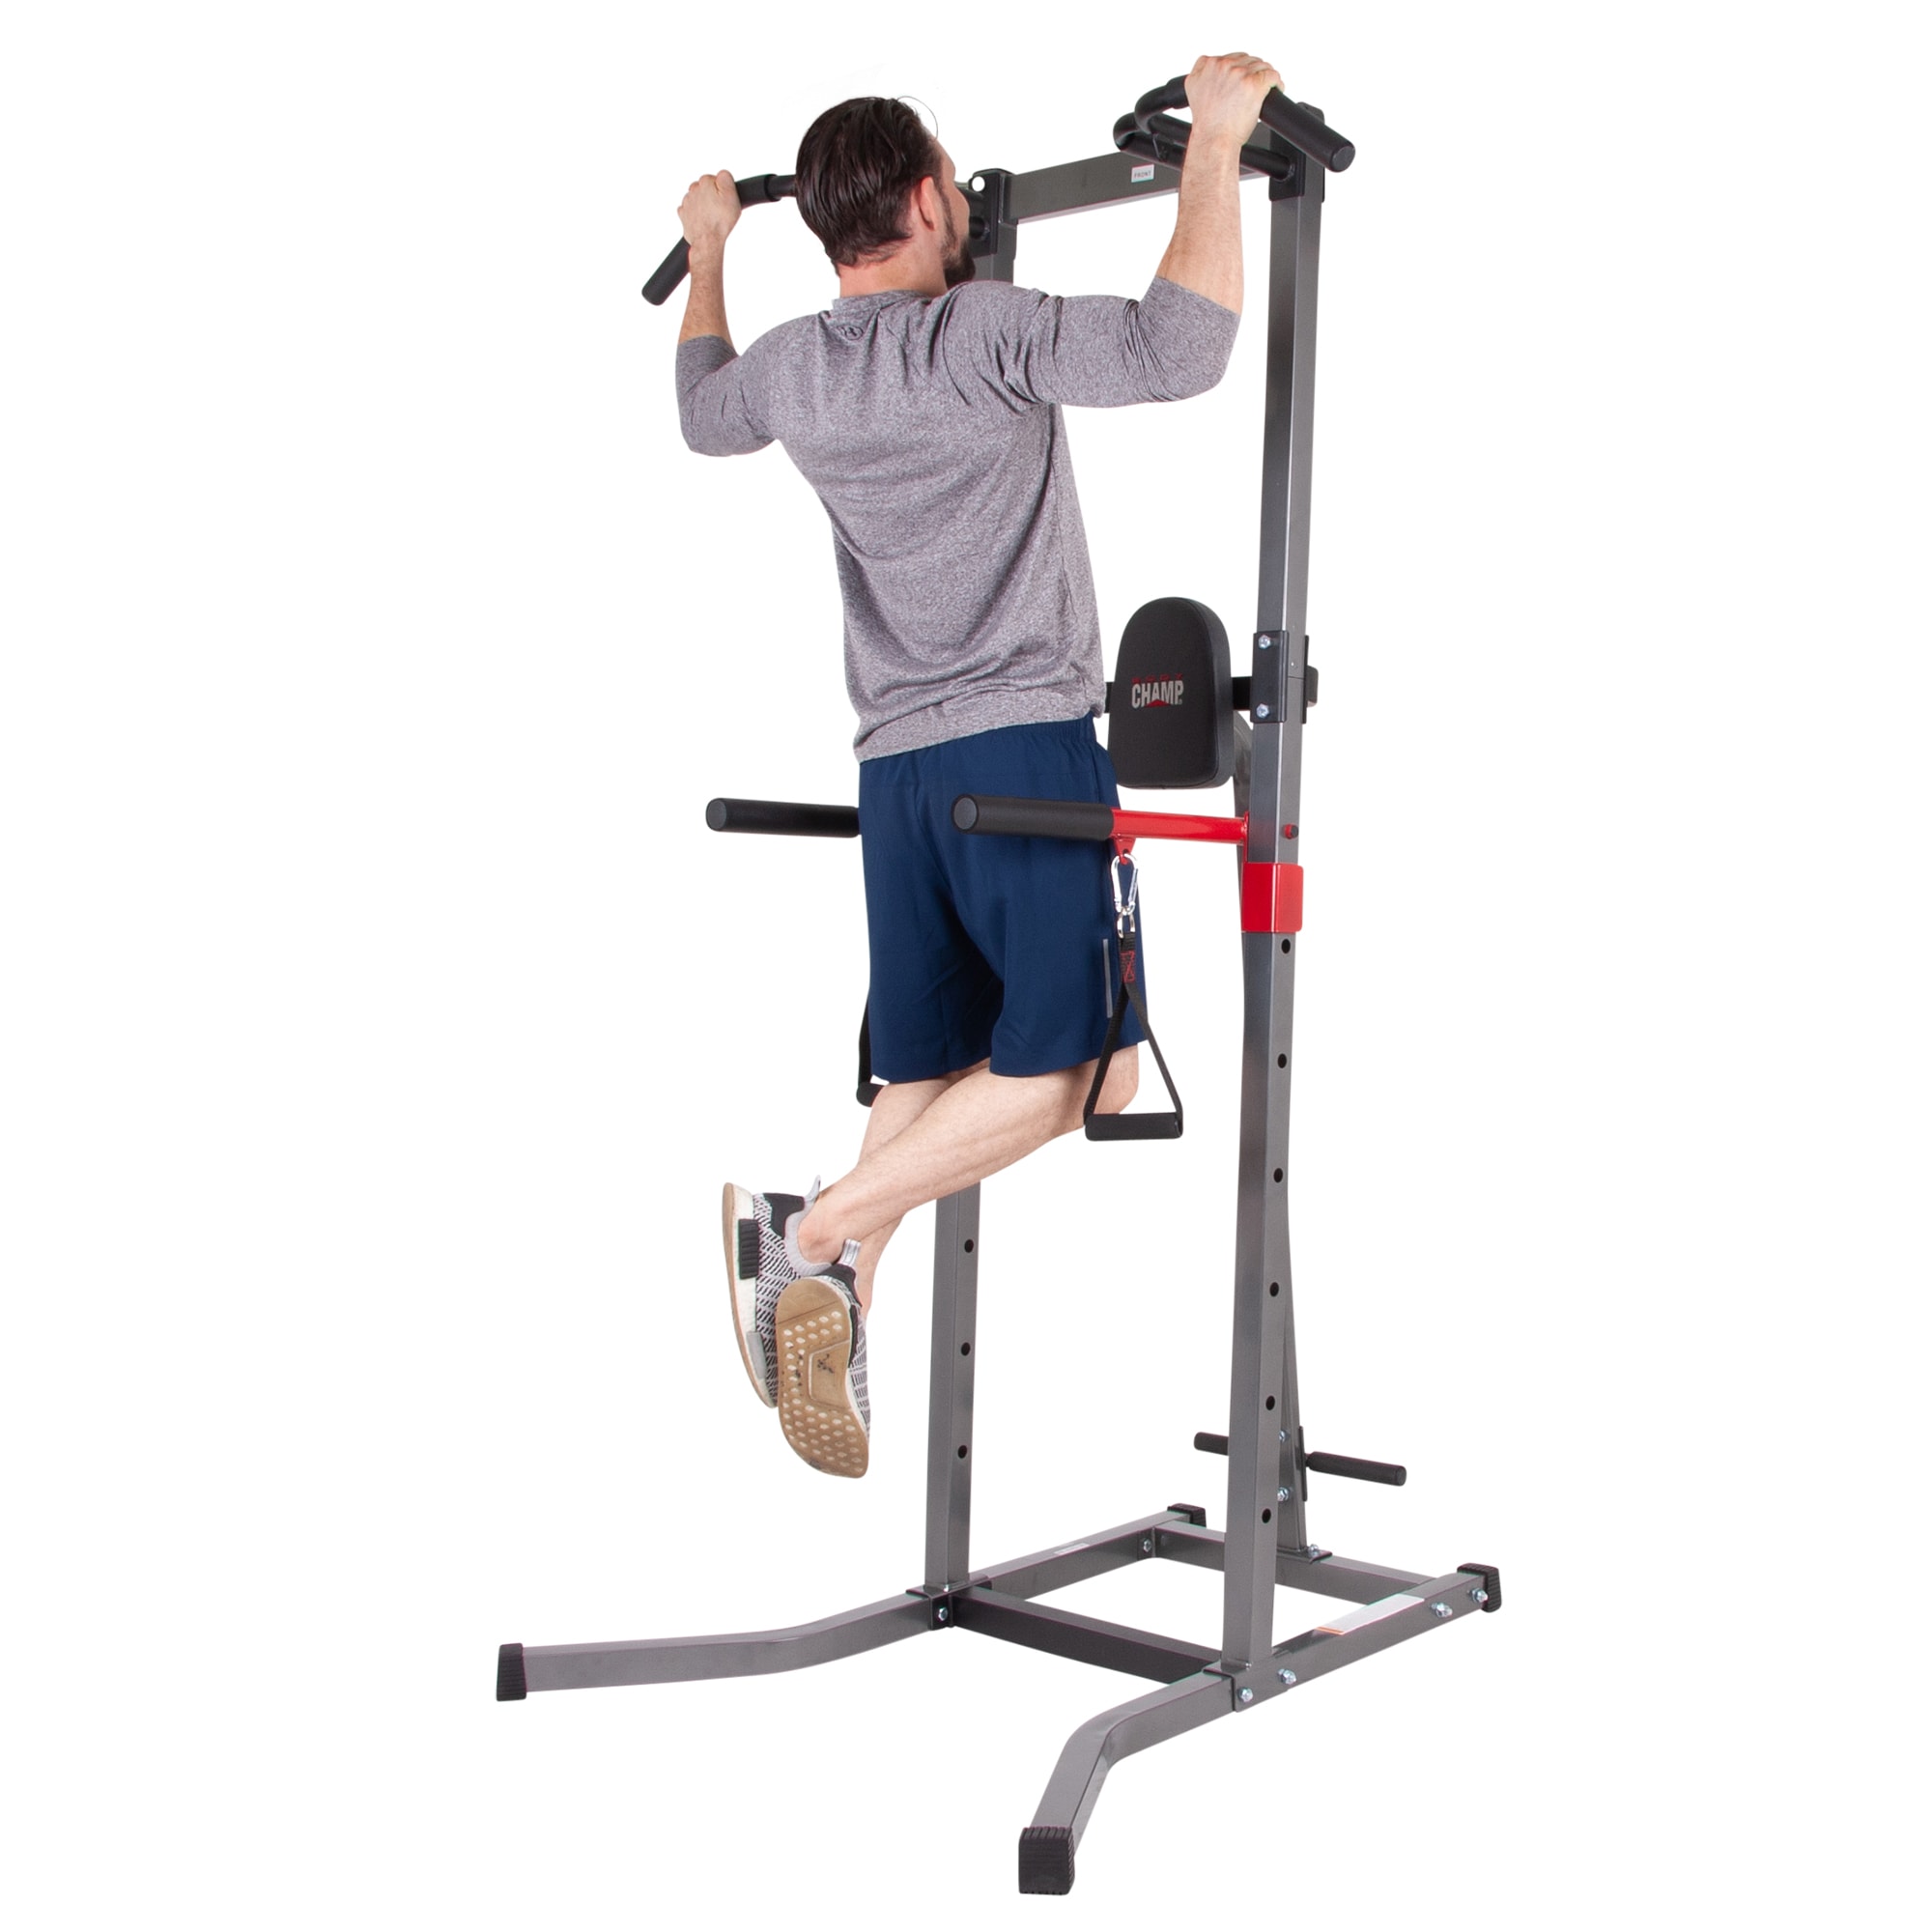 Tür Gym Bar Chin up Pull Push UP FITNESS SITUP DIPS TRAINING 